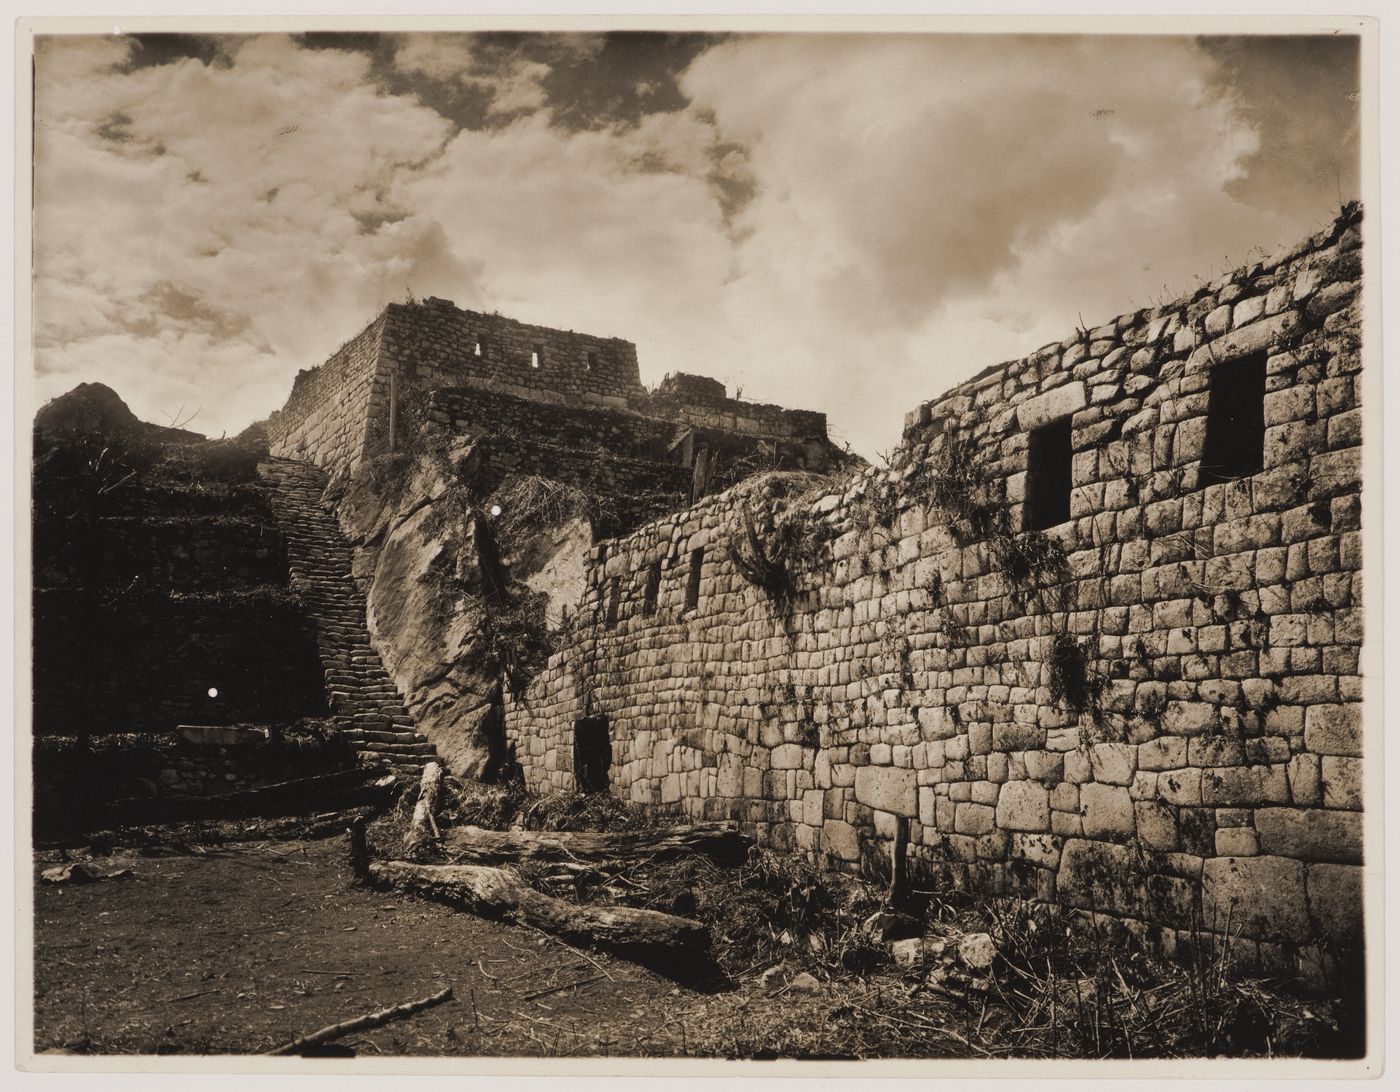 View of a wall, staircase and an unidentified building, Industrial Sector, Machu Picchu, Peru